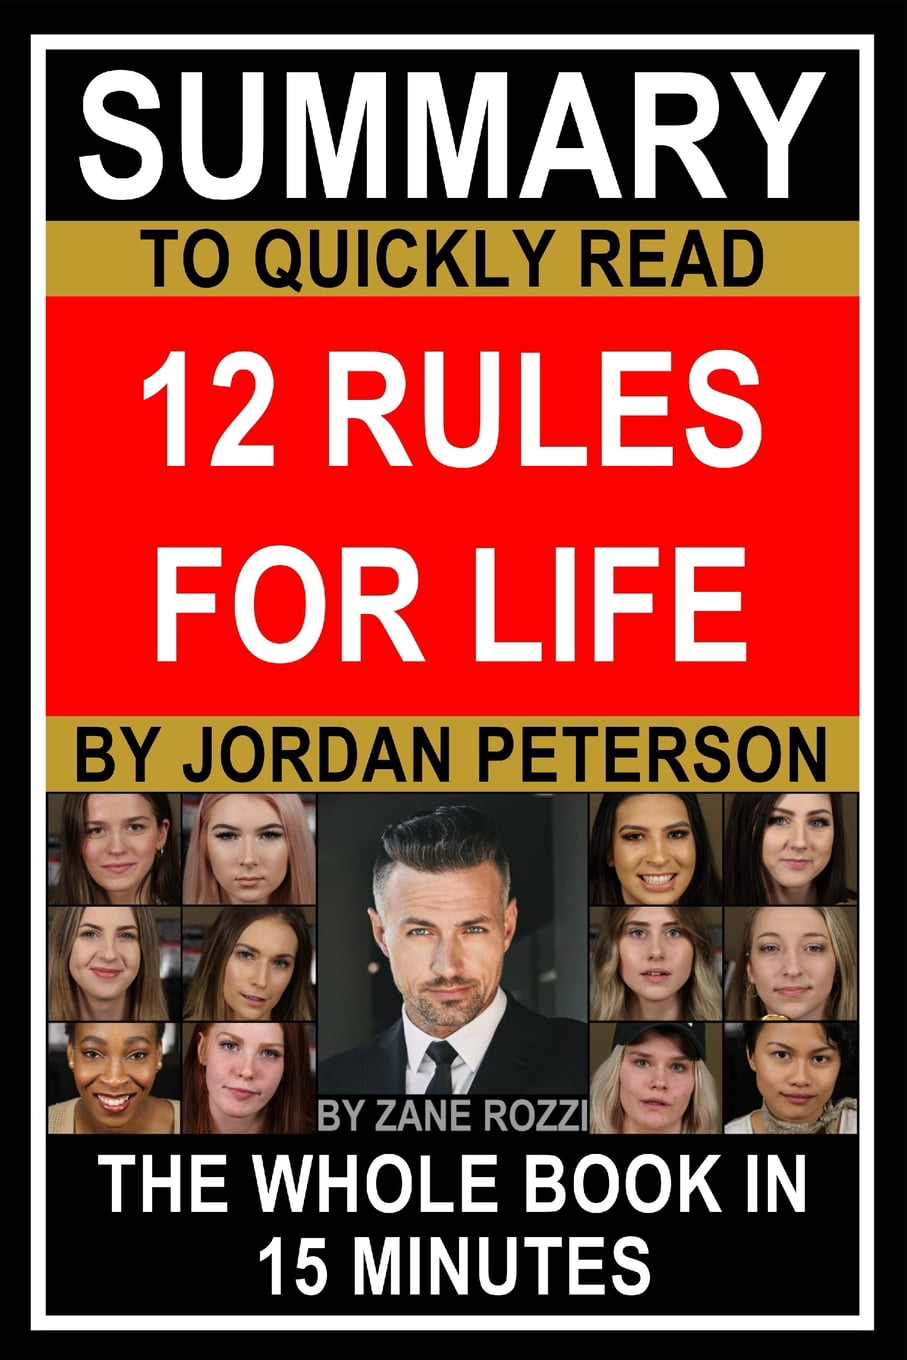 12 Rules For Life. Jordan Peterson - Book Summary